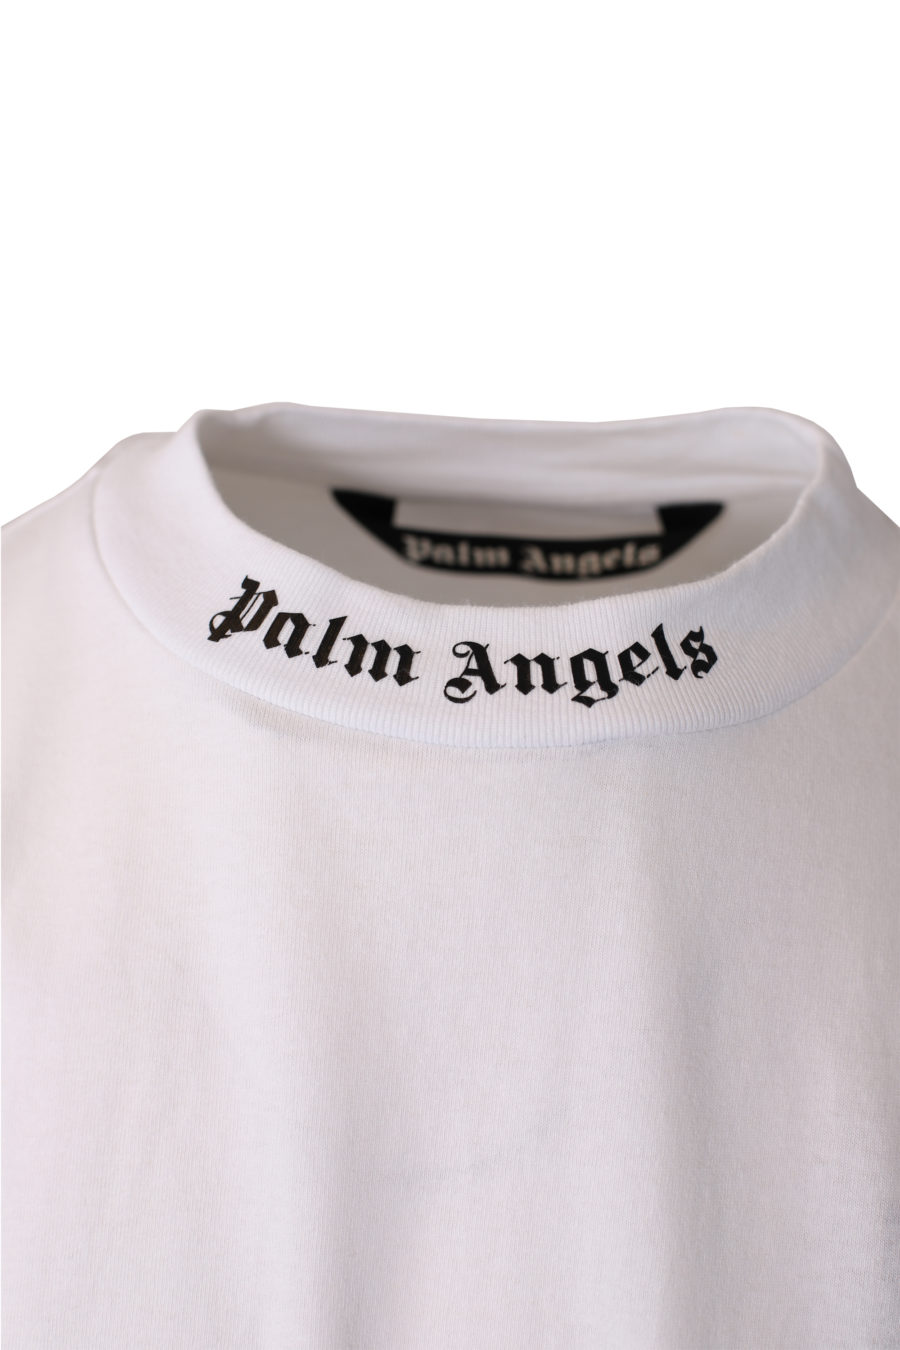 White oversize T-shirt with logo on the collar - IMG 1046